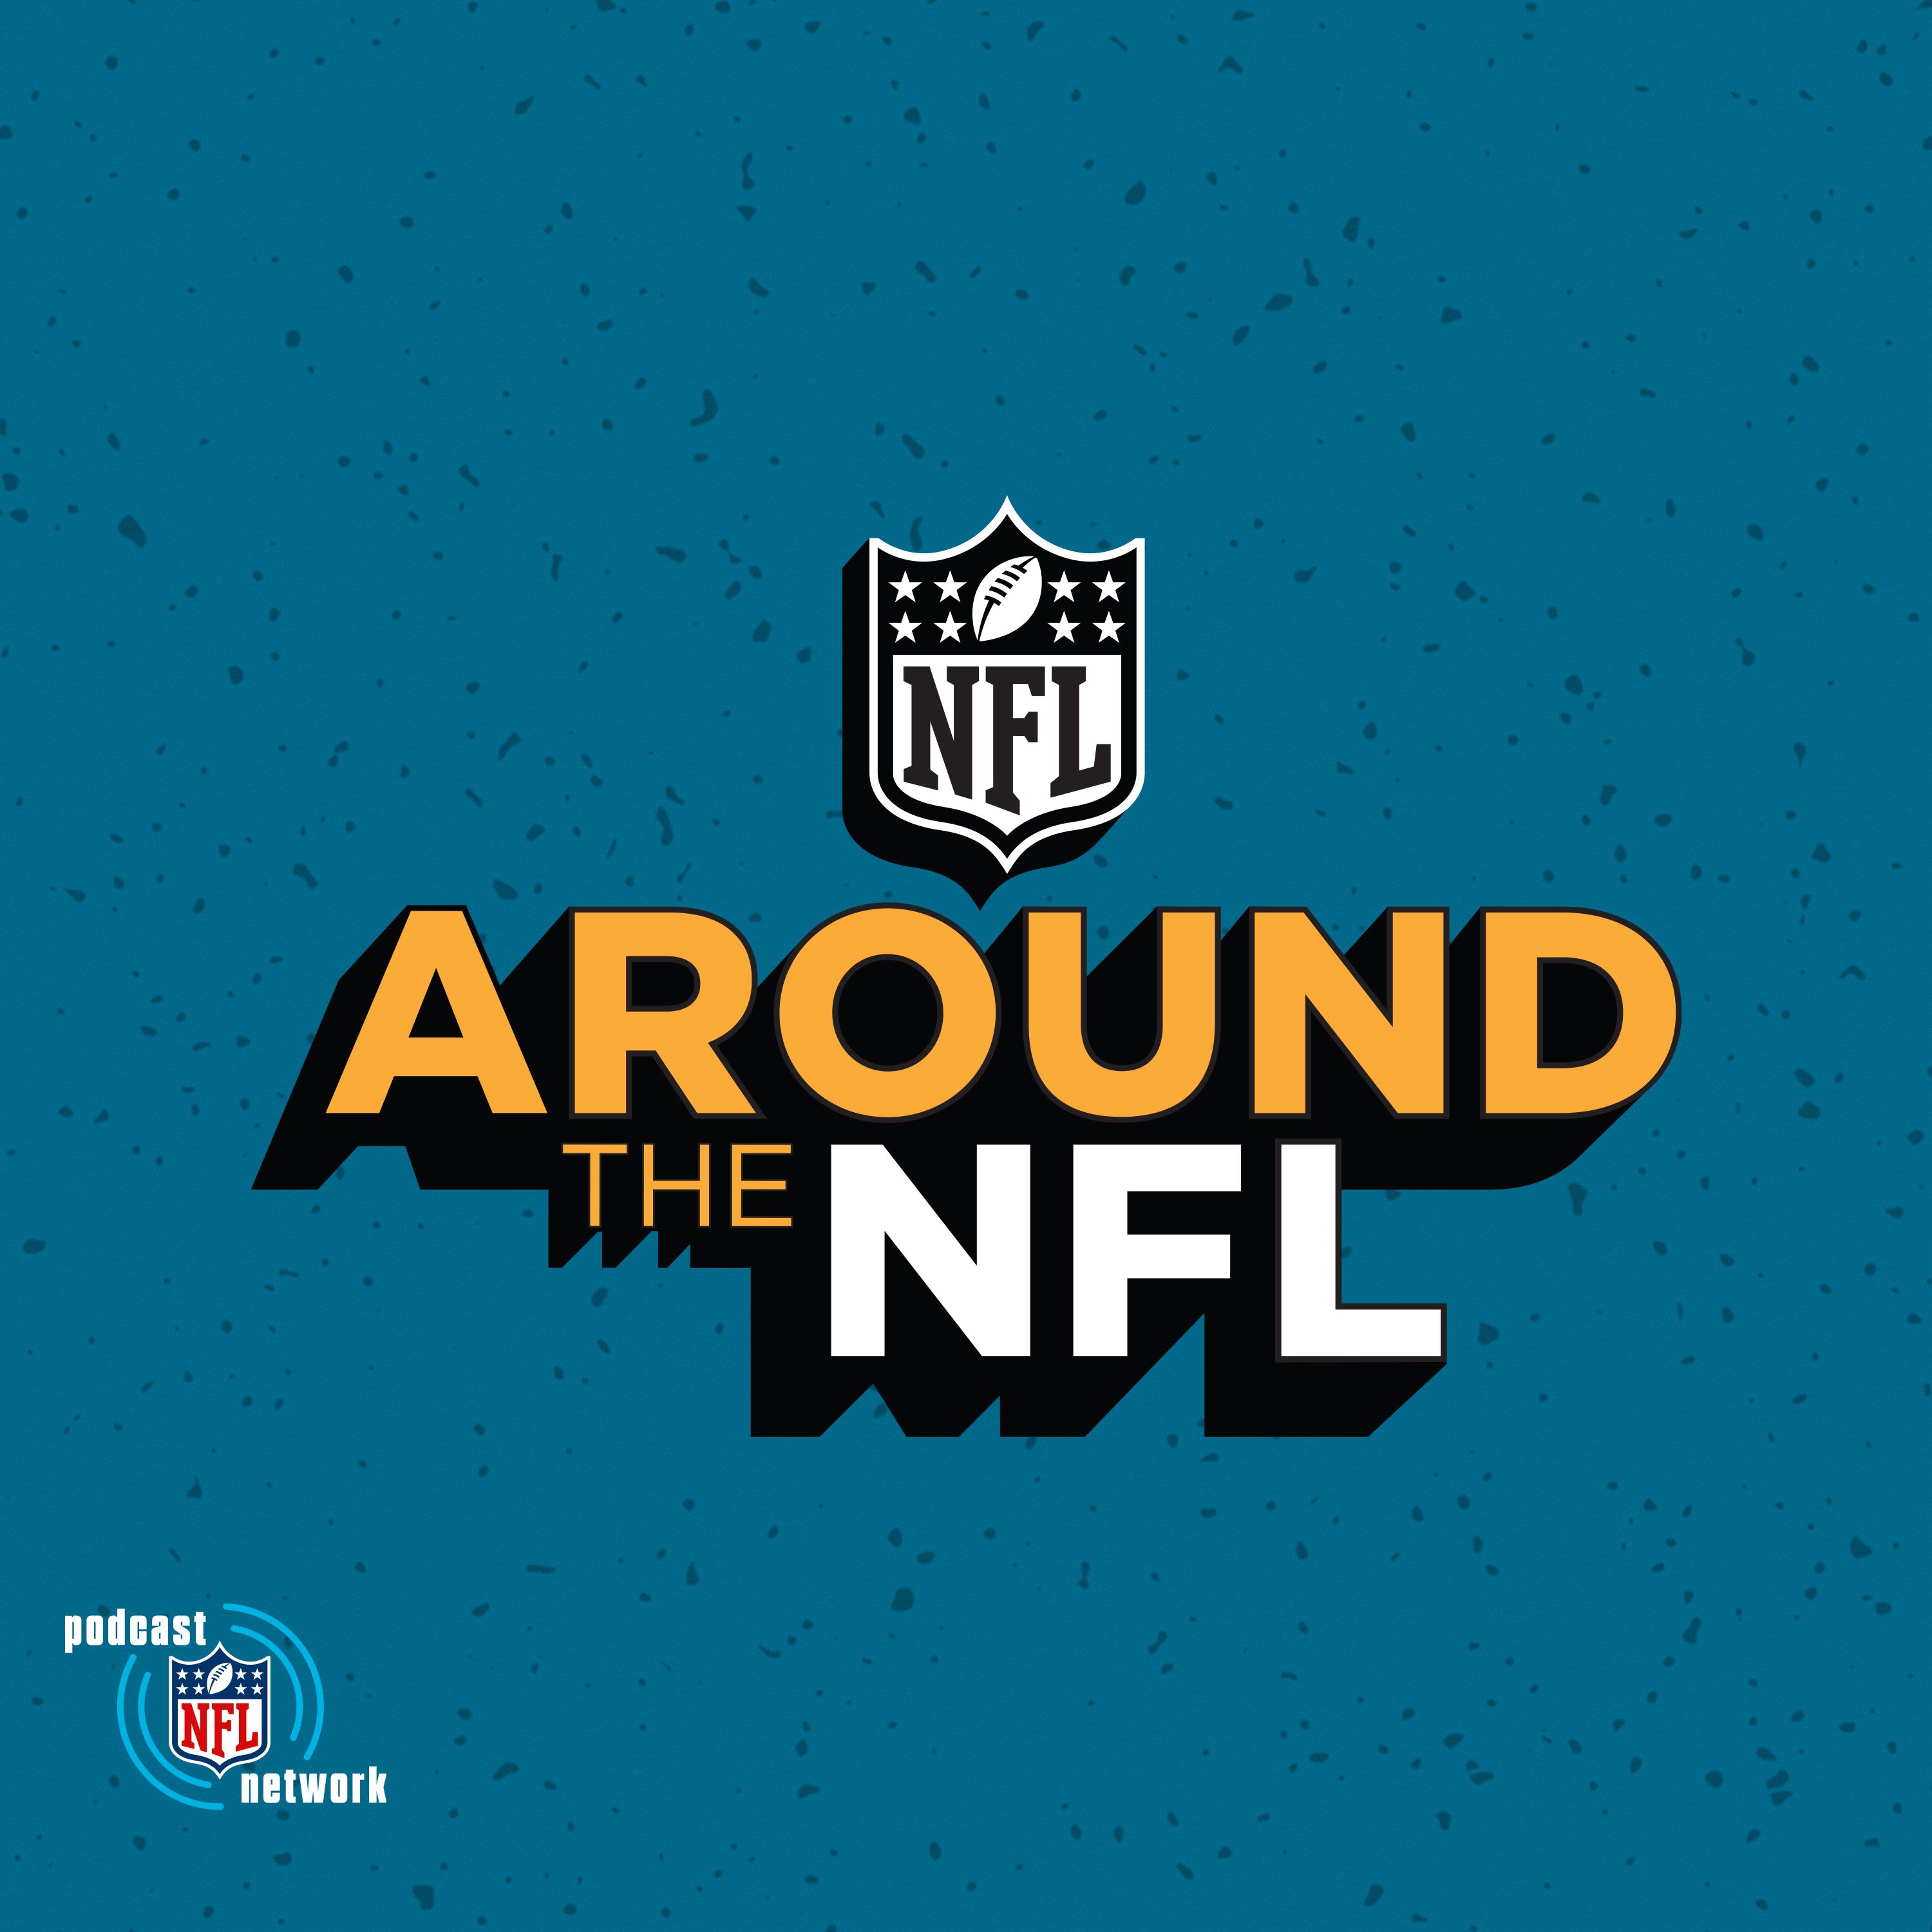 NFL Podcast Network